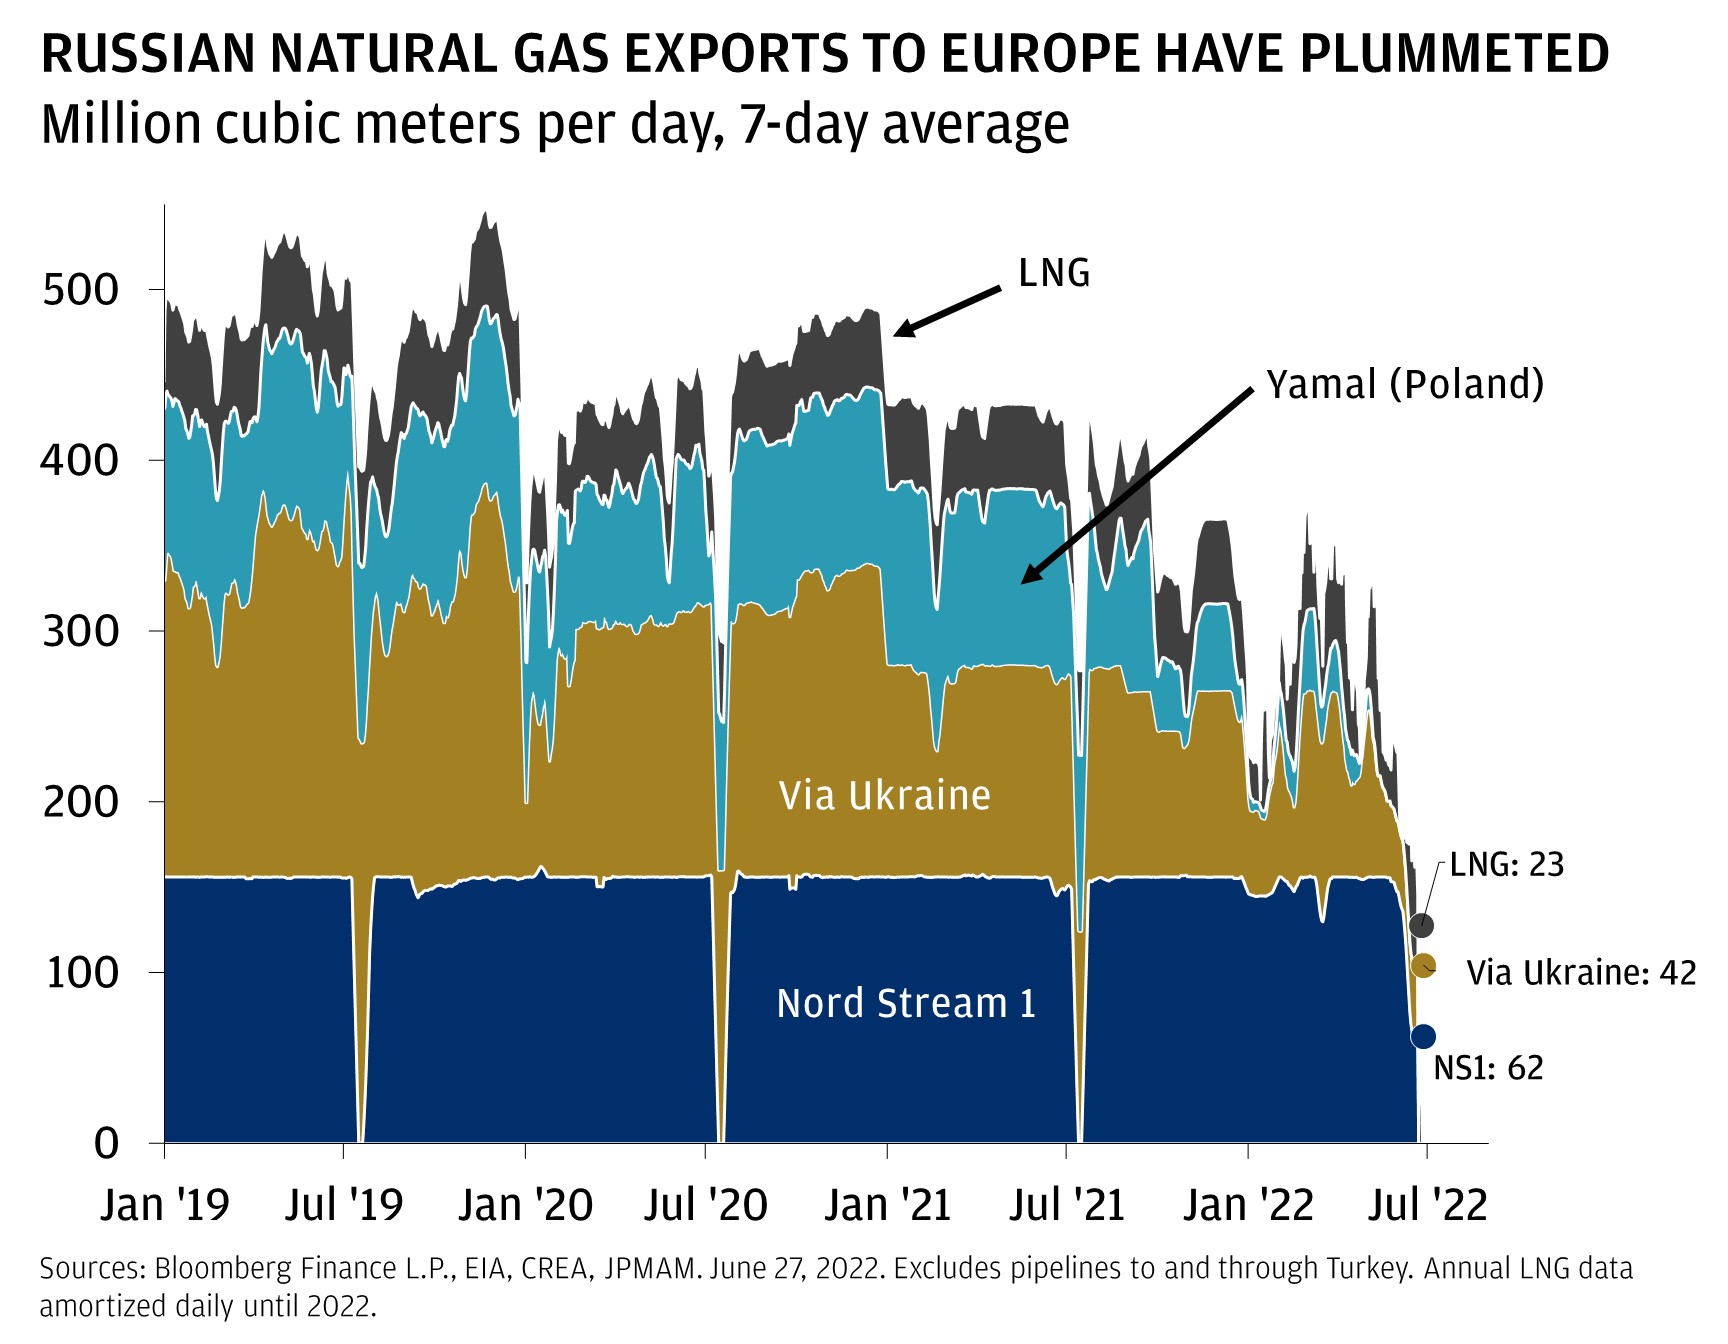 This chart shows the 7-day average of Russian natural gas exports to Europe in millions cubic meters per day from January 2019 to July 2022